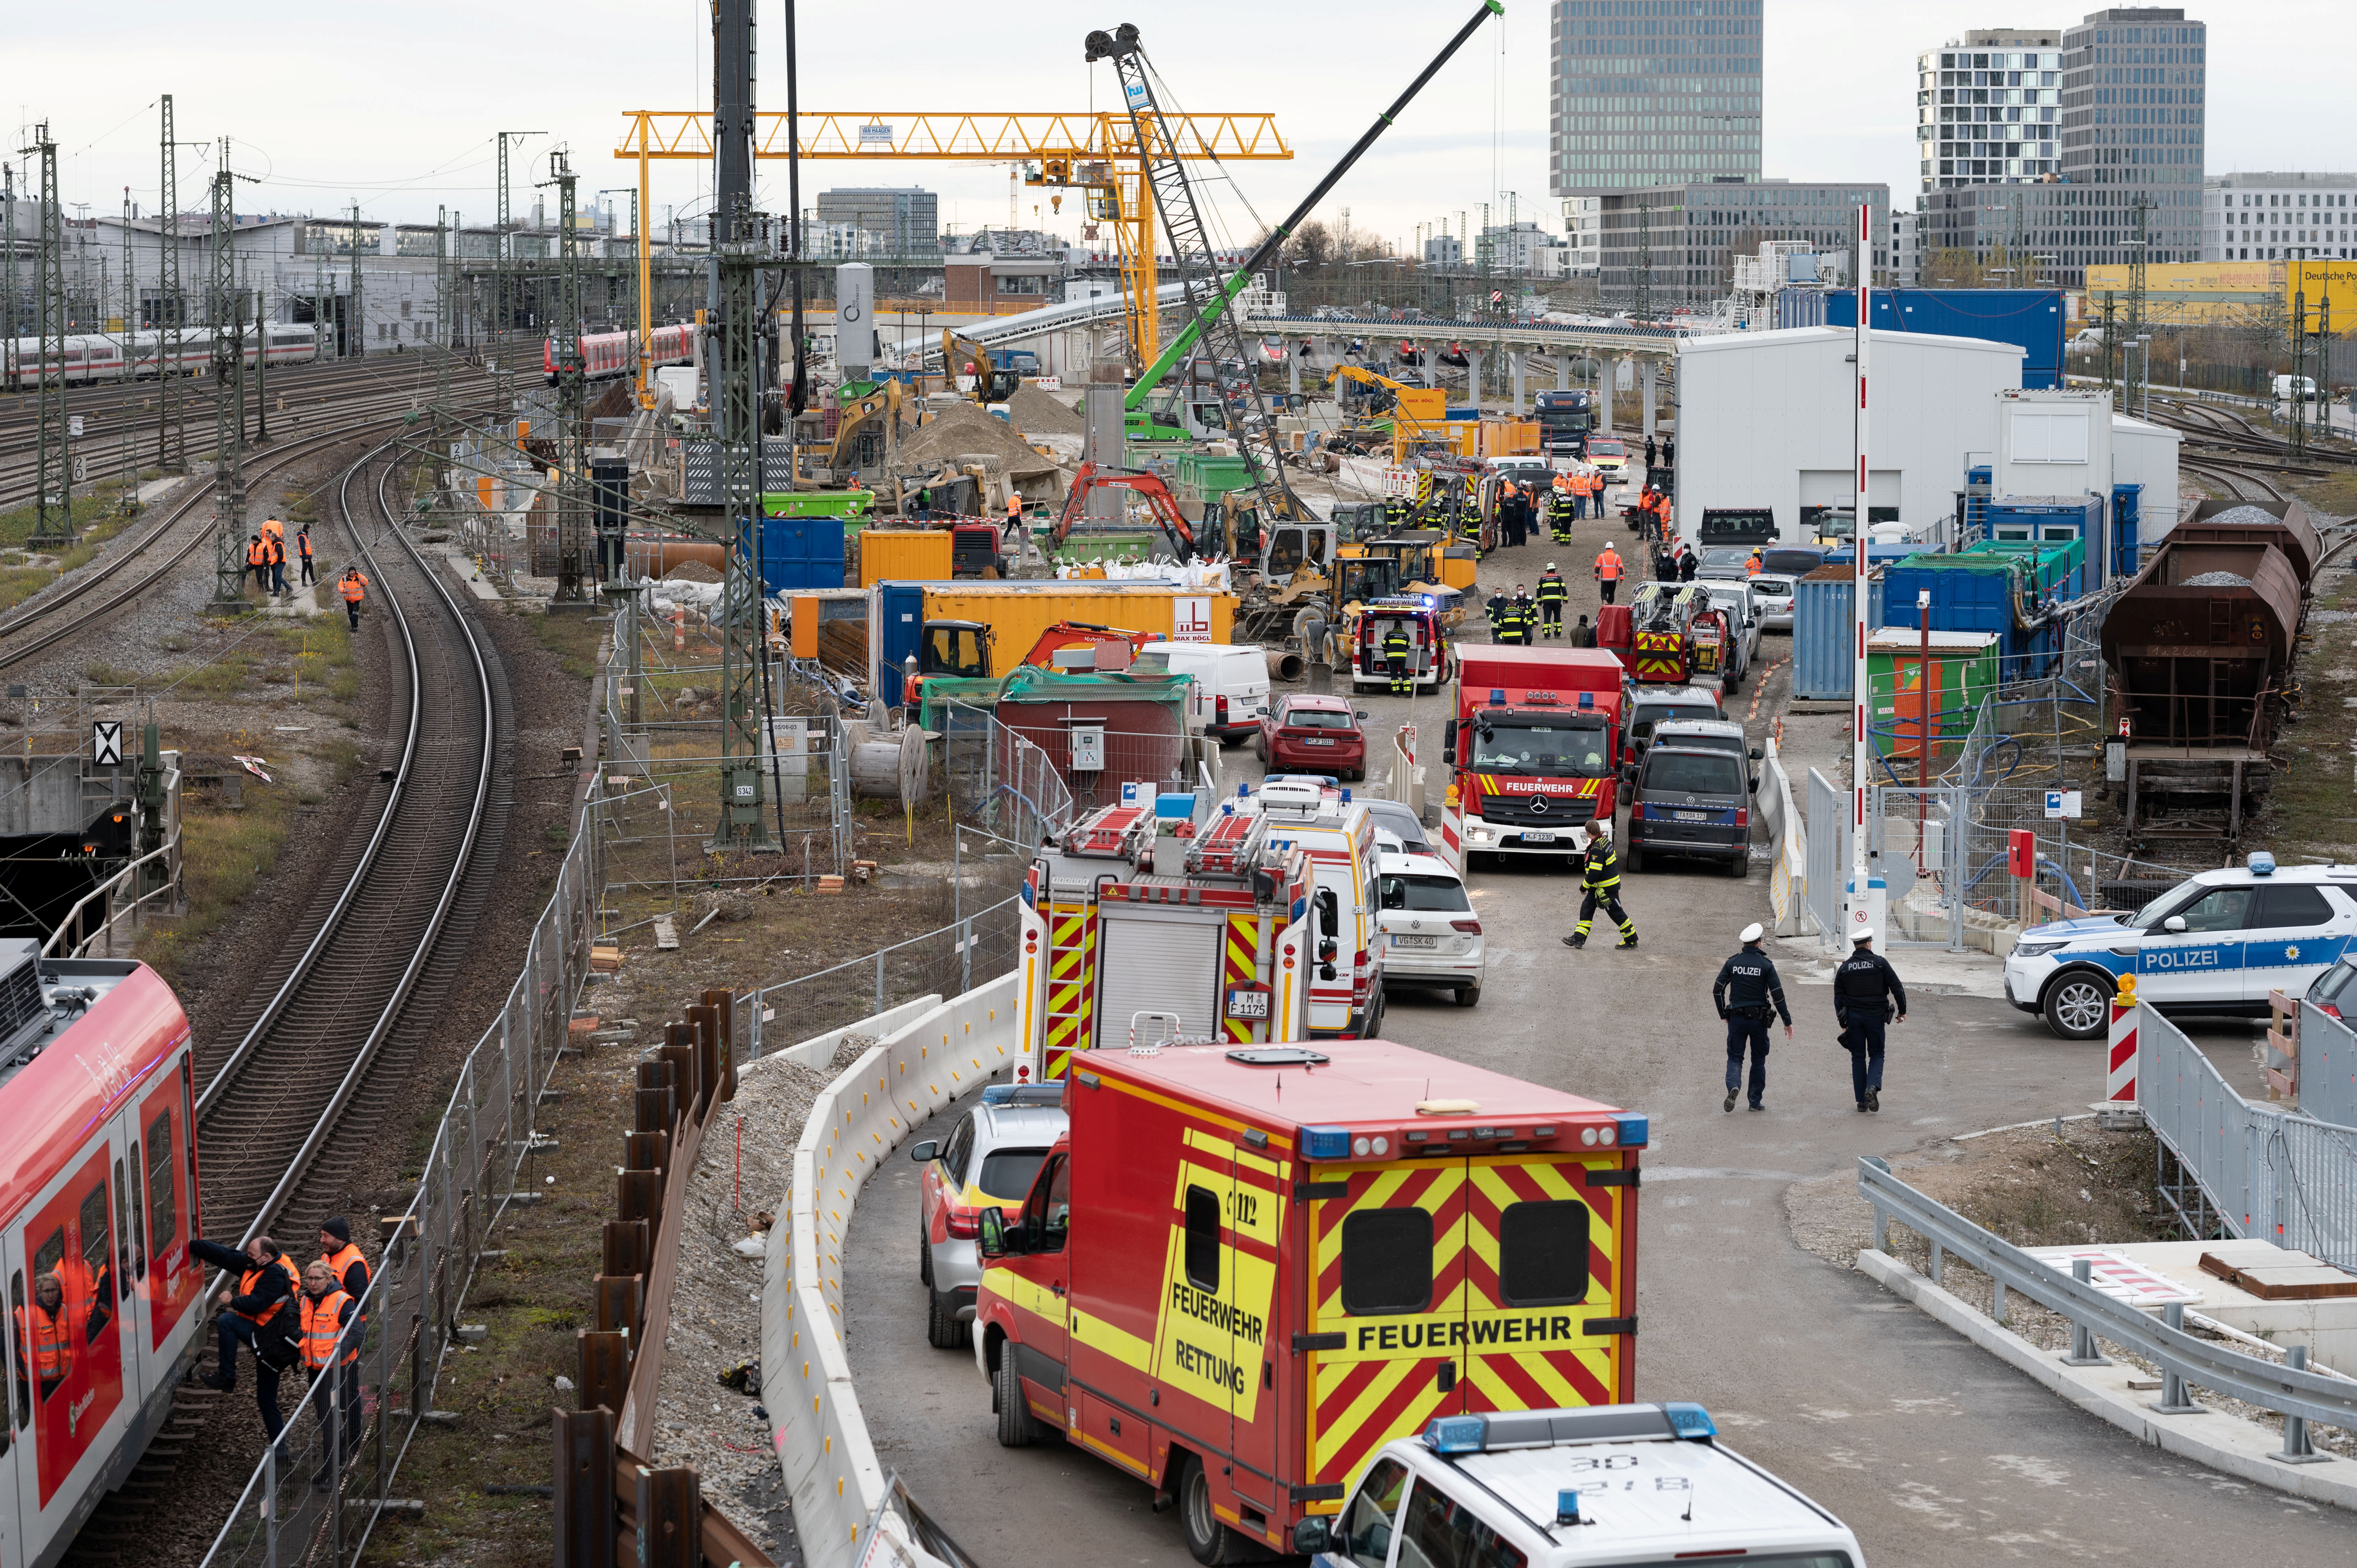 Police and firefighters secure the scene after an old aircraft bomb exploded during construction work at a bridge the busy main train station, injuring three people in Munich, Germany, December 1, 2021.     REUTERS/Andreas Gebert